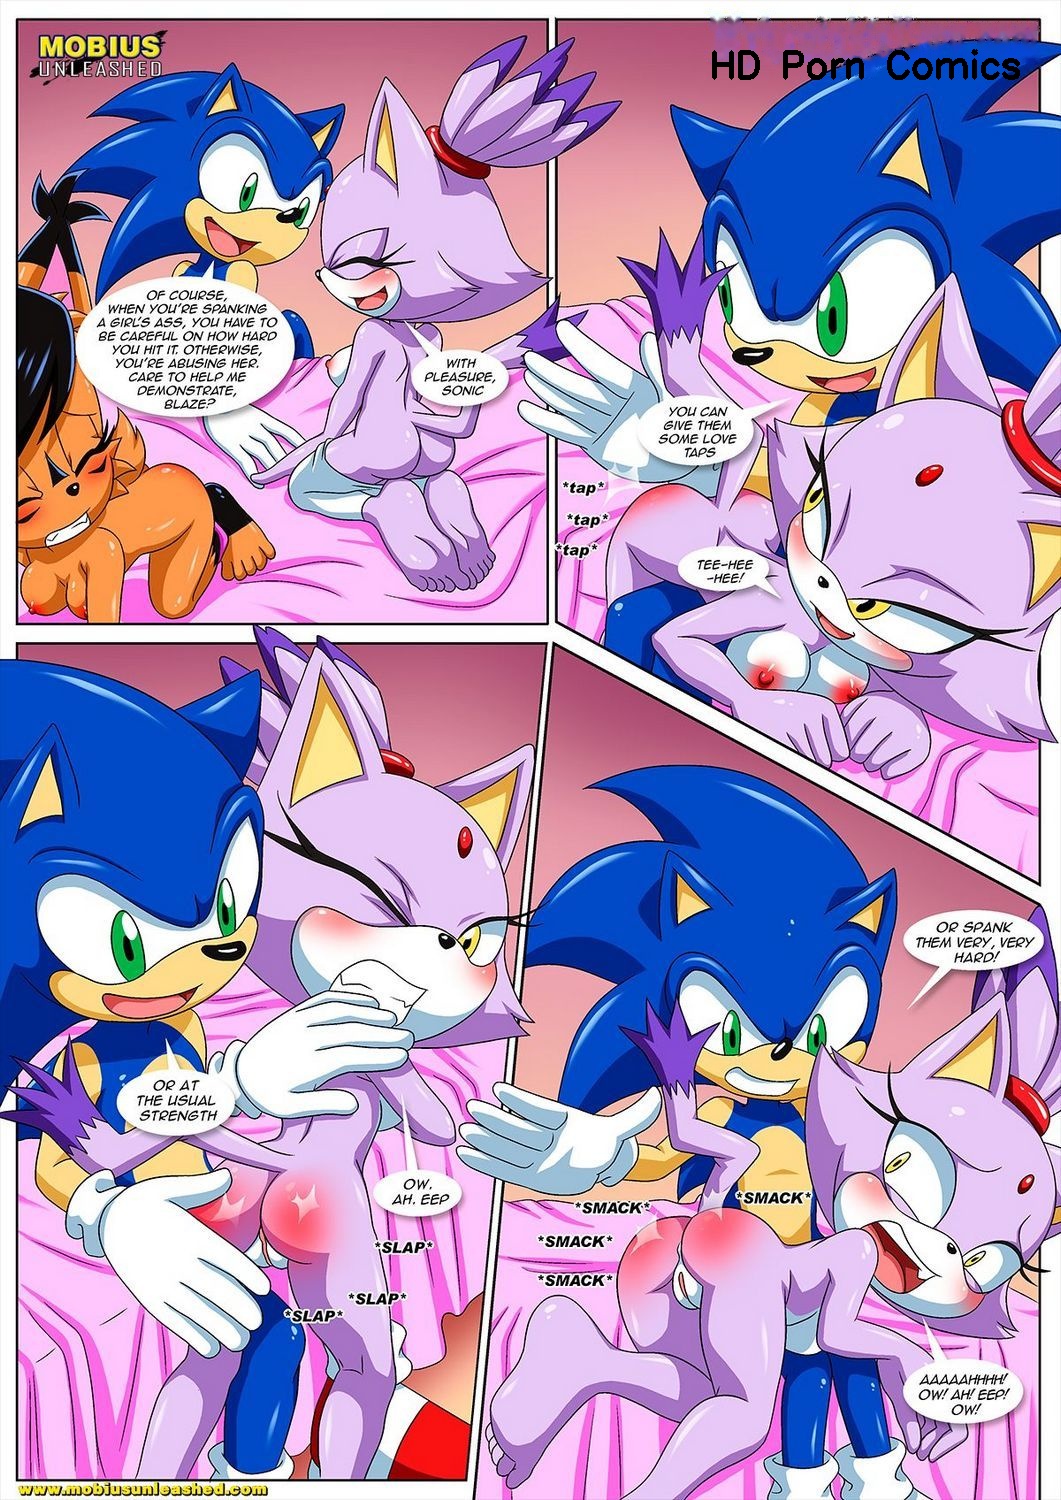 Sexy Spankings Ass Cartoons - Sonic's Guide To Spanking comic porn - HD Porn Comics